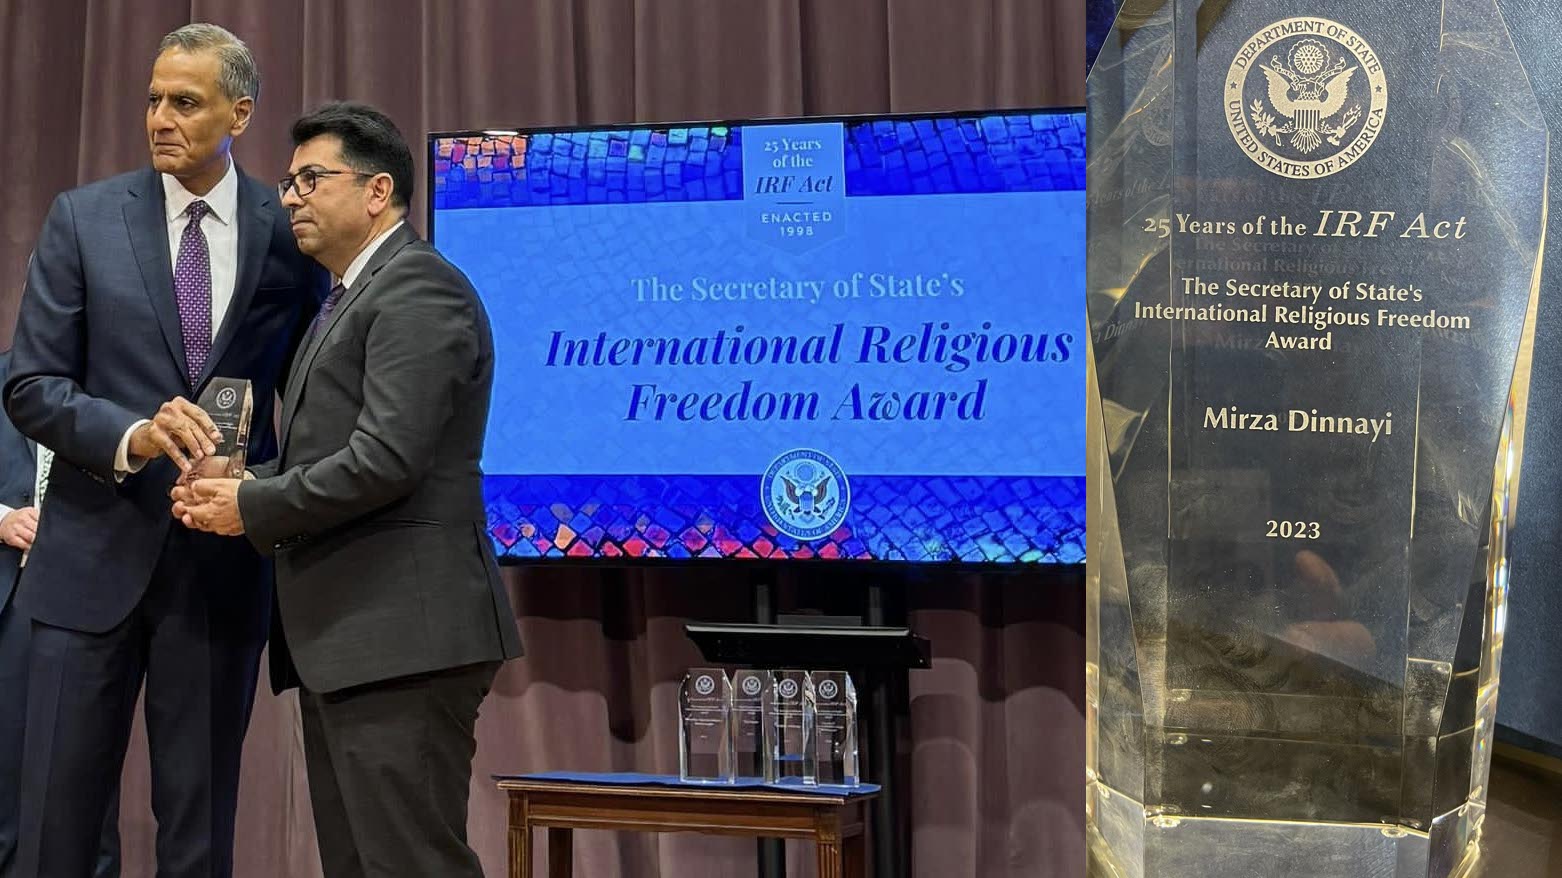 Mirza Dinnayi, a Yezidi human rights defender was awarded a religious freedom award by the US Government (Photo: Mirza Dinnayi/X).